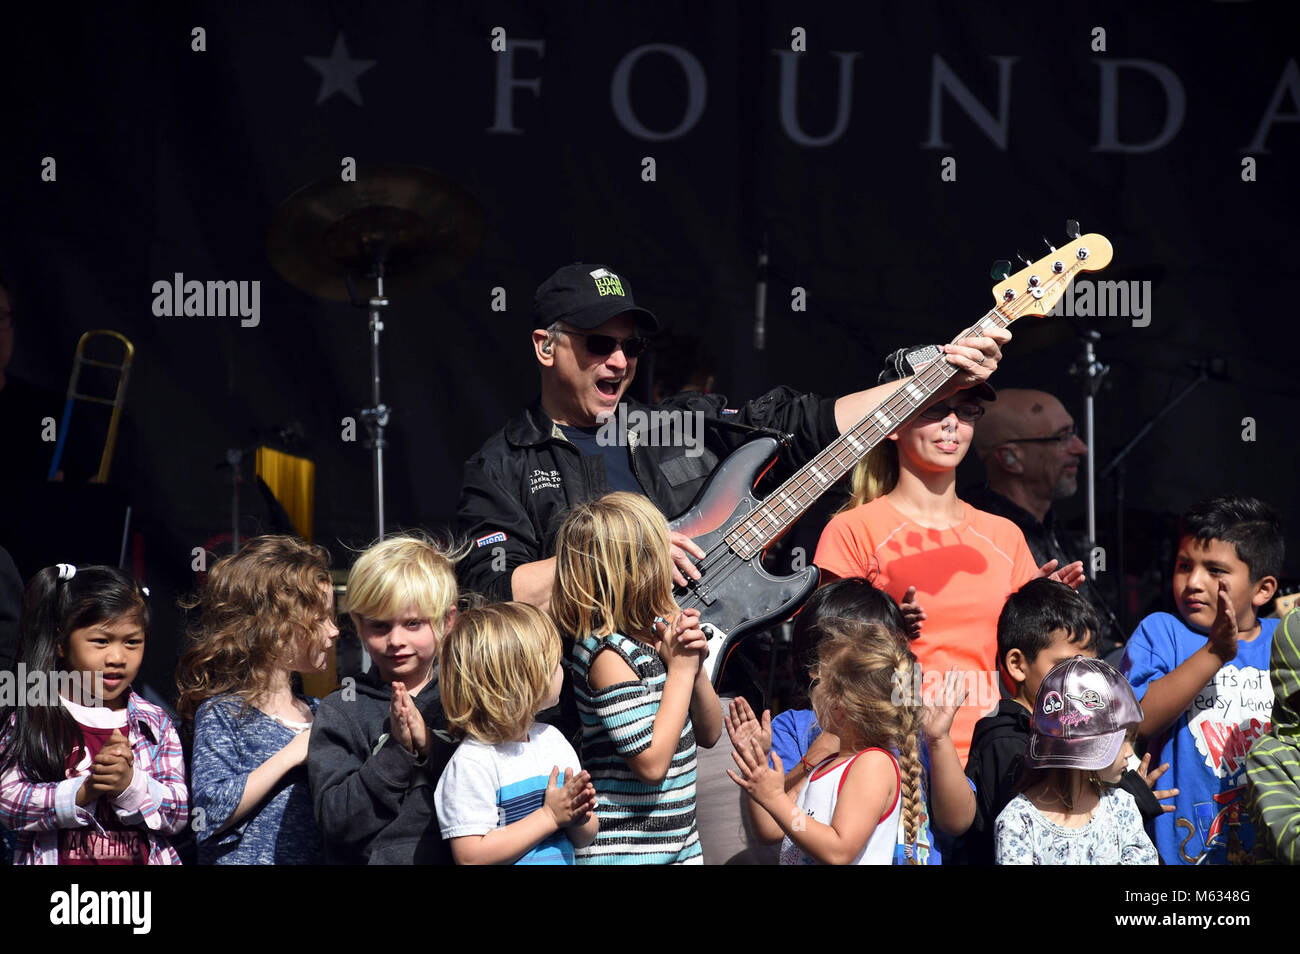 SAN DIEGO (Feb. 10, 2018) Actor, musician, and humanitarian Gary Sinise (center) and the Lt. Dan Band perform while surrounded by kids on stage at Naval Medical Center San Diego (NMCSD) during their sixth annual Invincible Spirit Festival. The festival included a three-hour concert by the band, activities for children, a rock-climbing wall, food cooked by Team Irvine, and 149 volunteers who set up and served food at the event. Gary Sinise and Lt. Dan Band debut their first military concert at NMCSD in 2012. (U.S. Navy Stock Photo